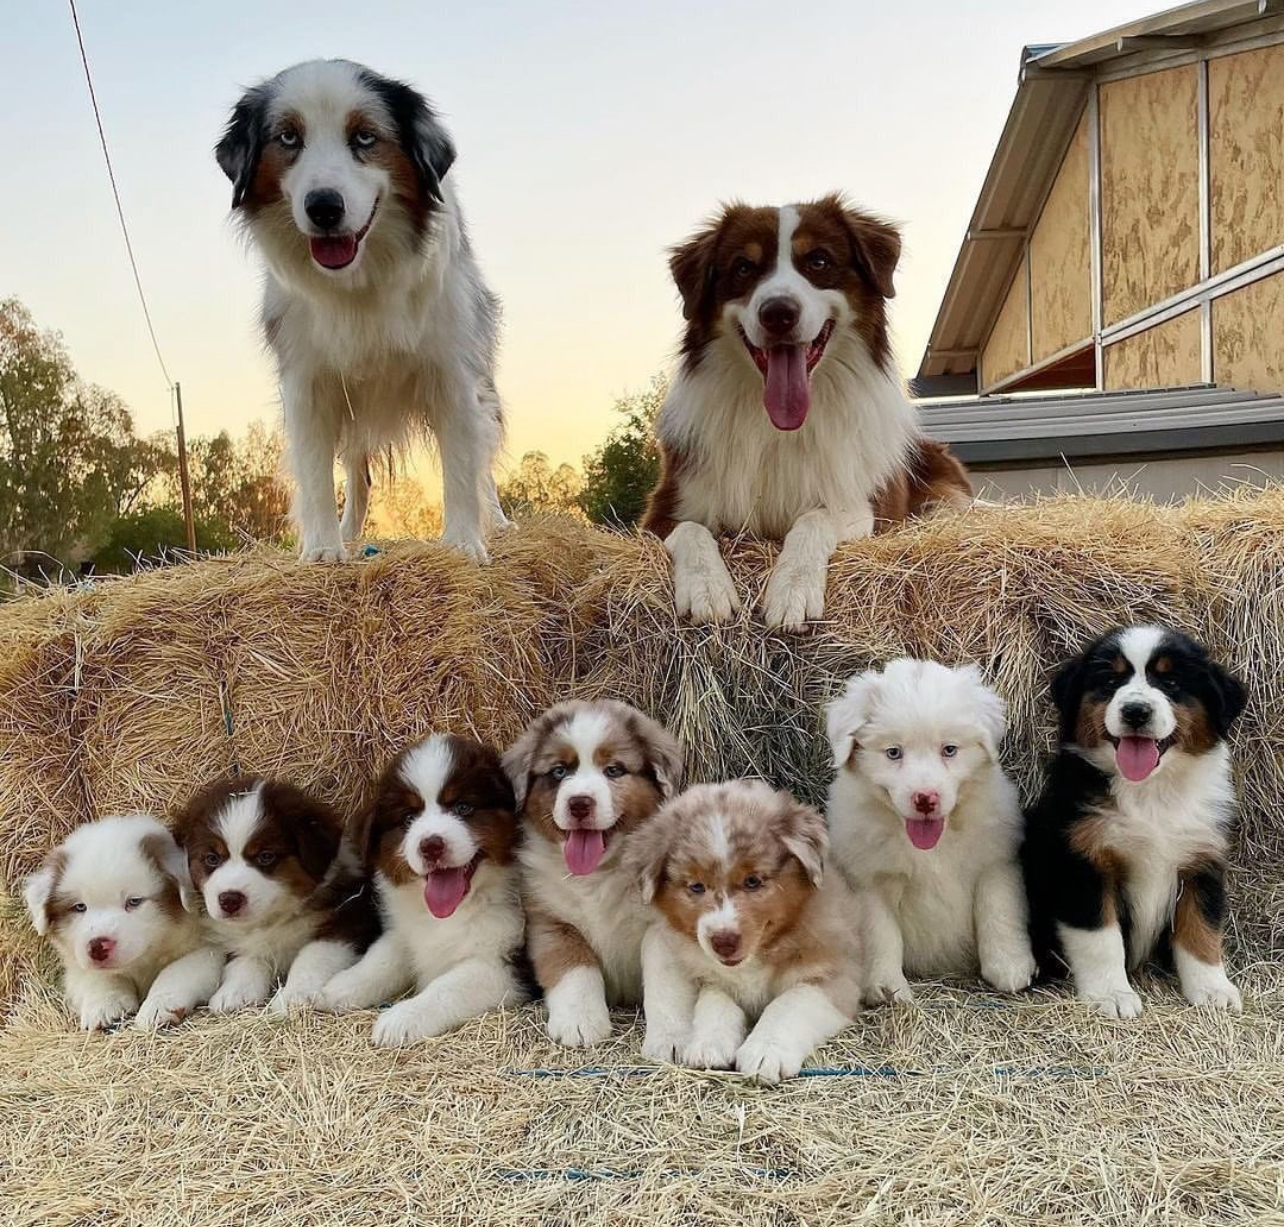 Adorable Aussie puppies available for adoption. Aussie Puppies for Sale in reasonable prices.